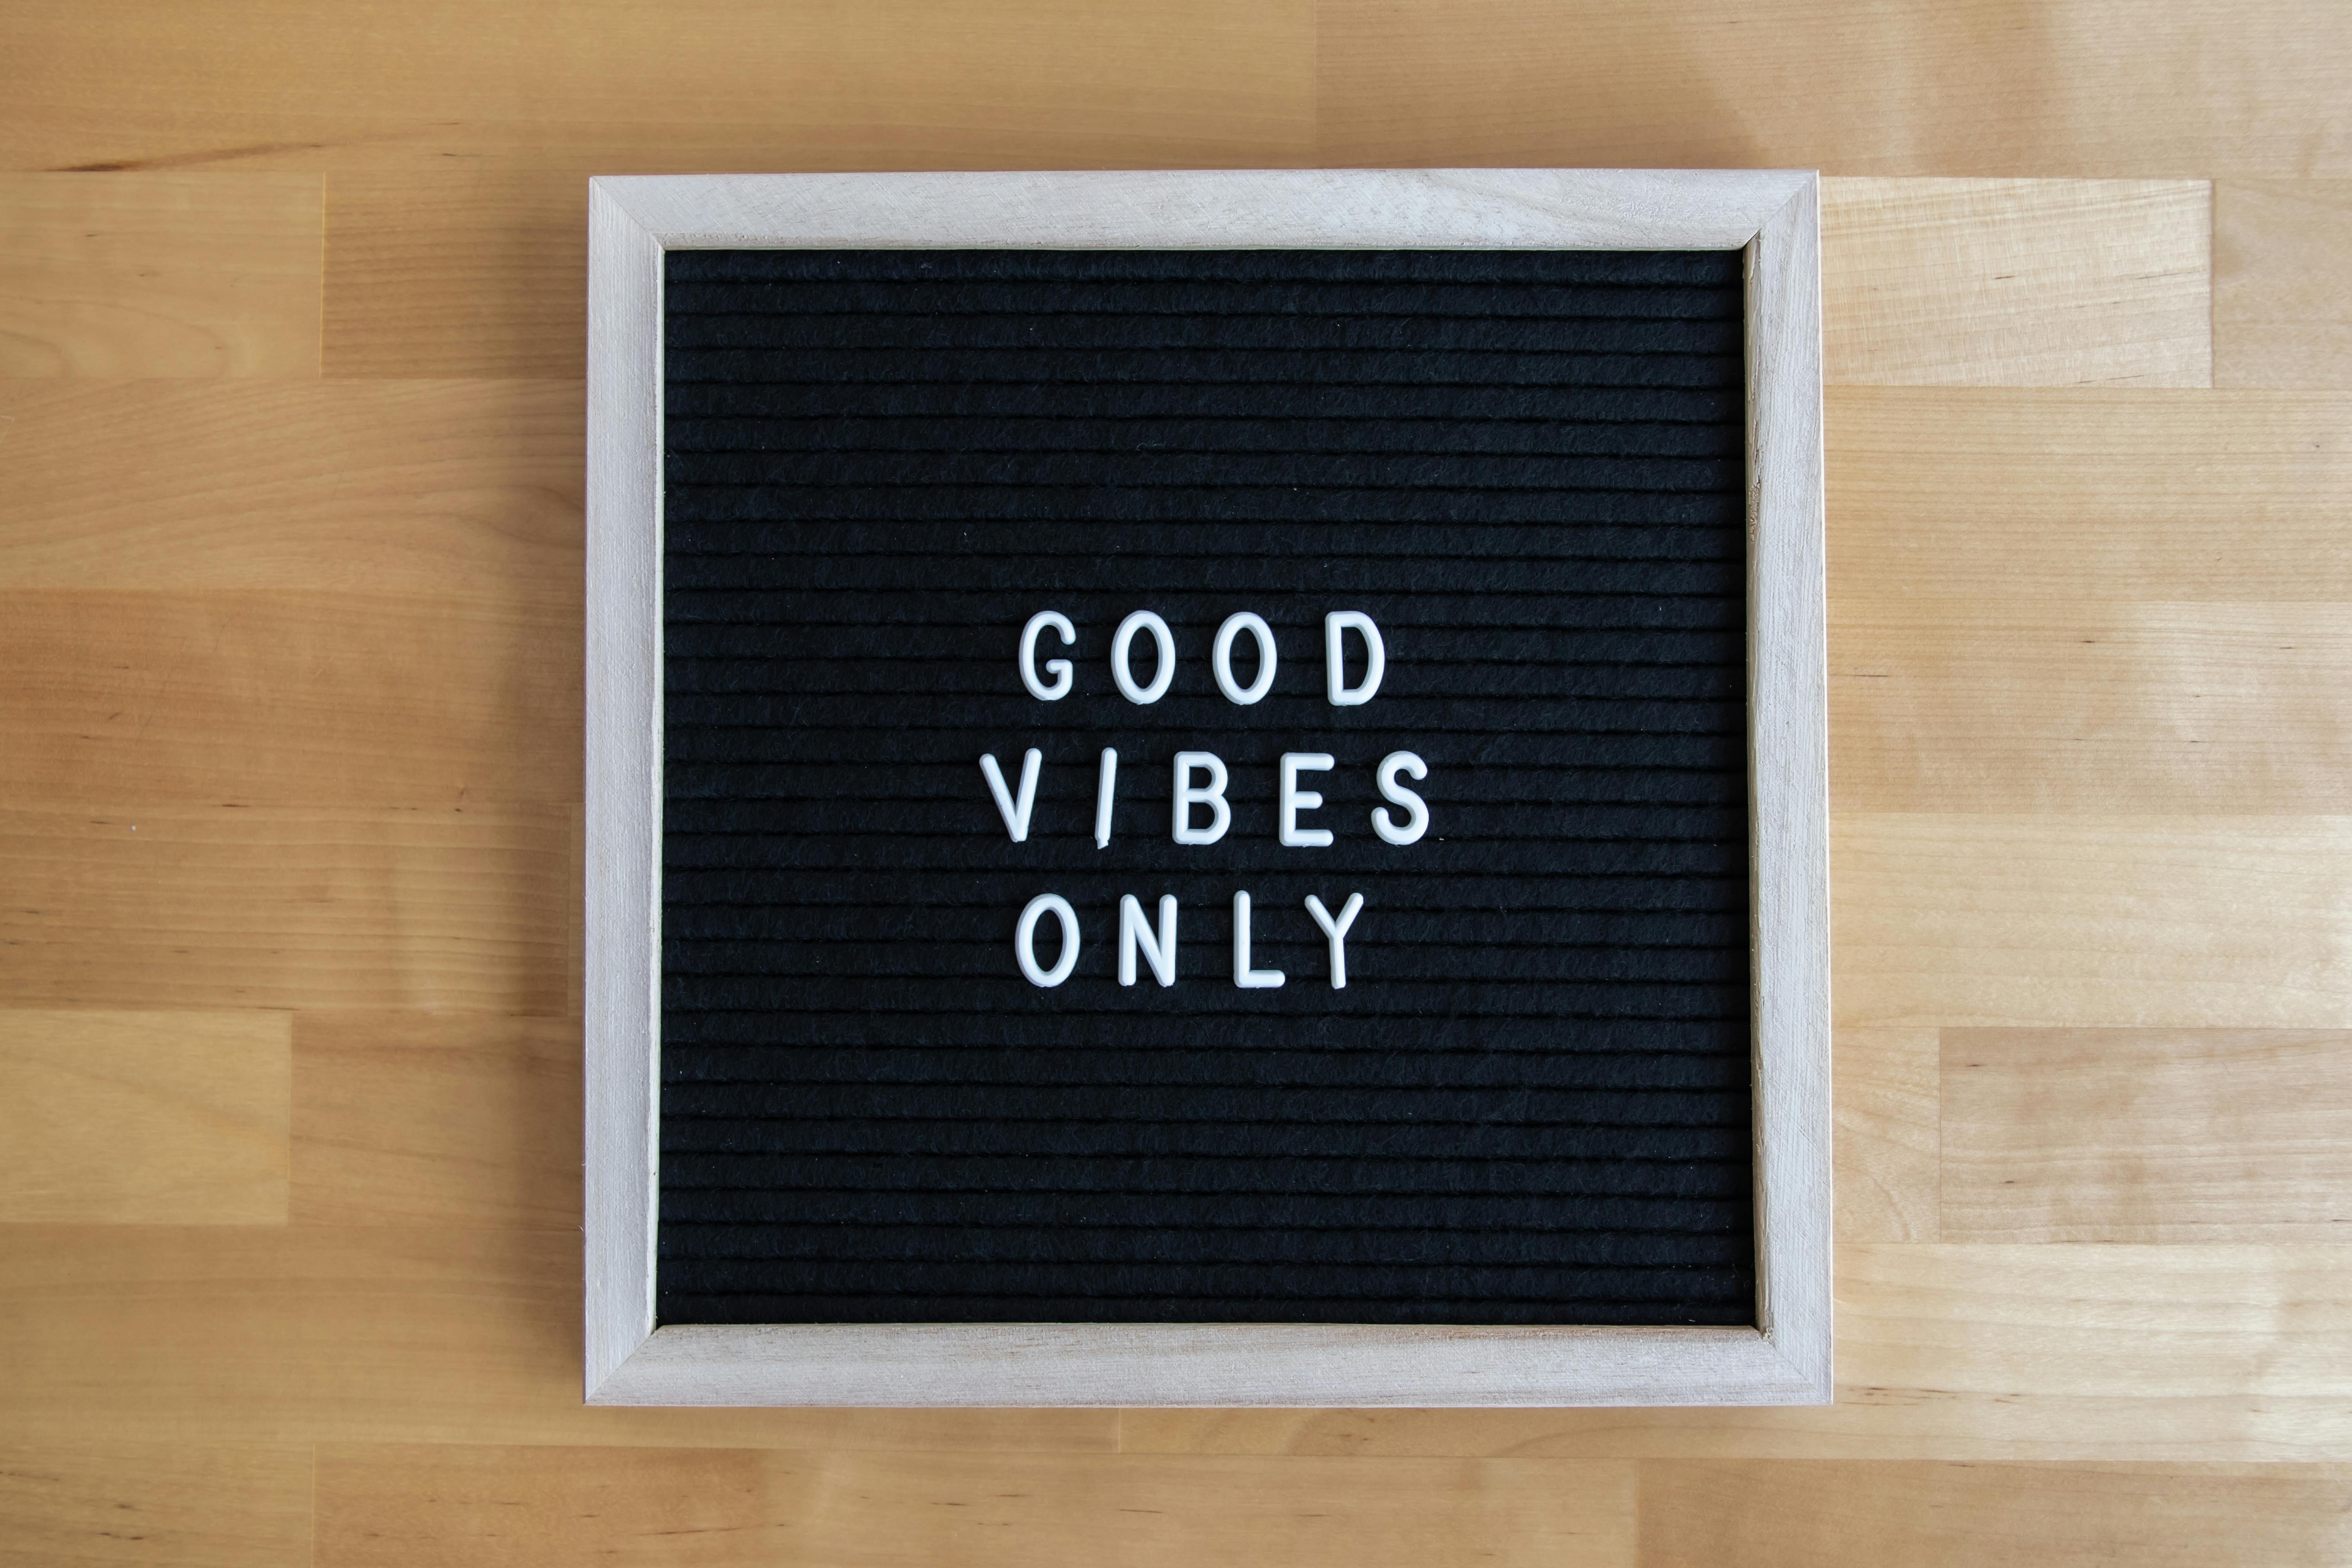 Good Vibes Only Free Stock Photo